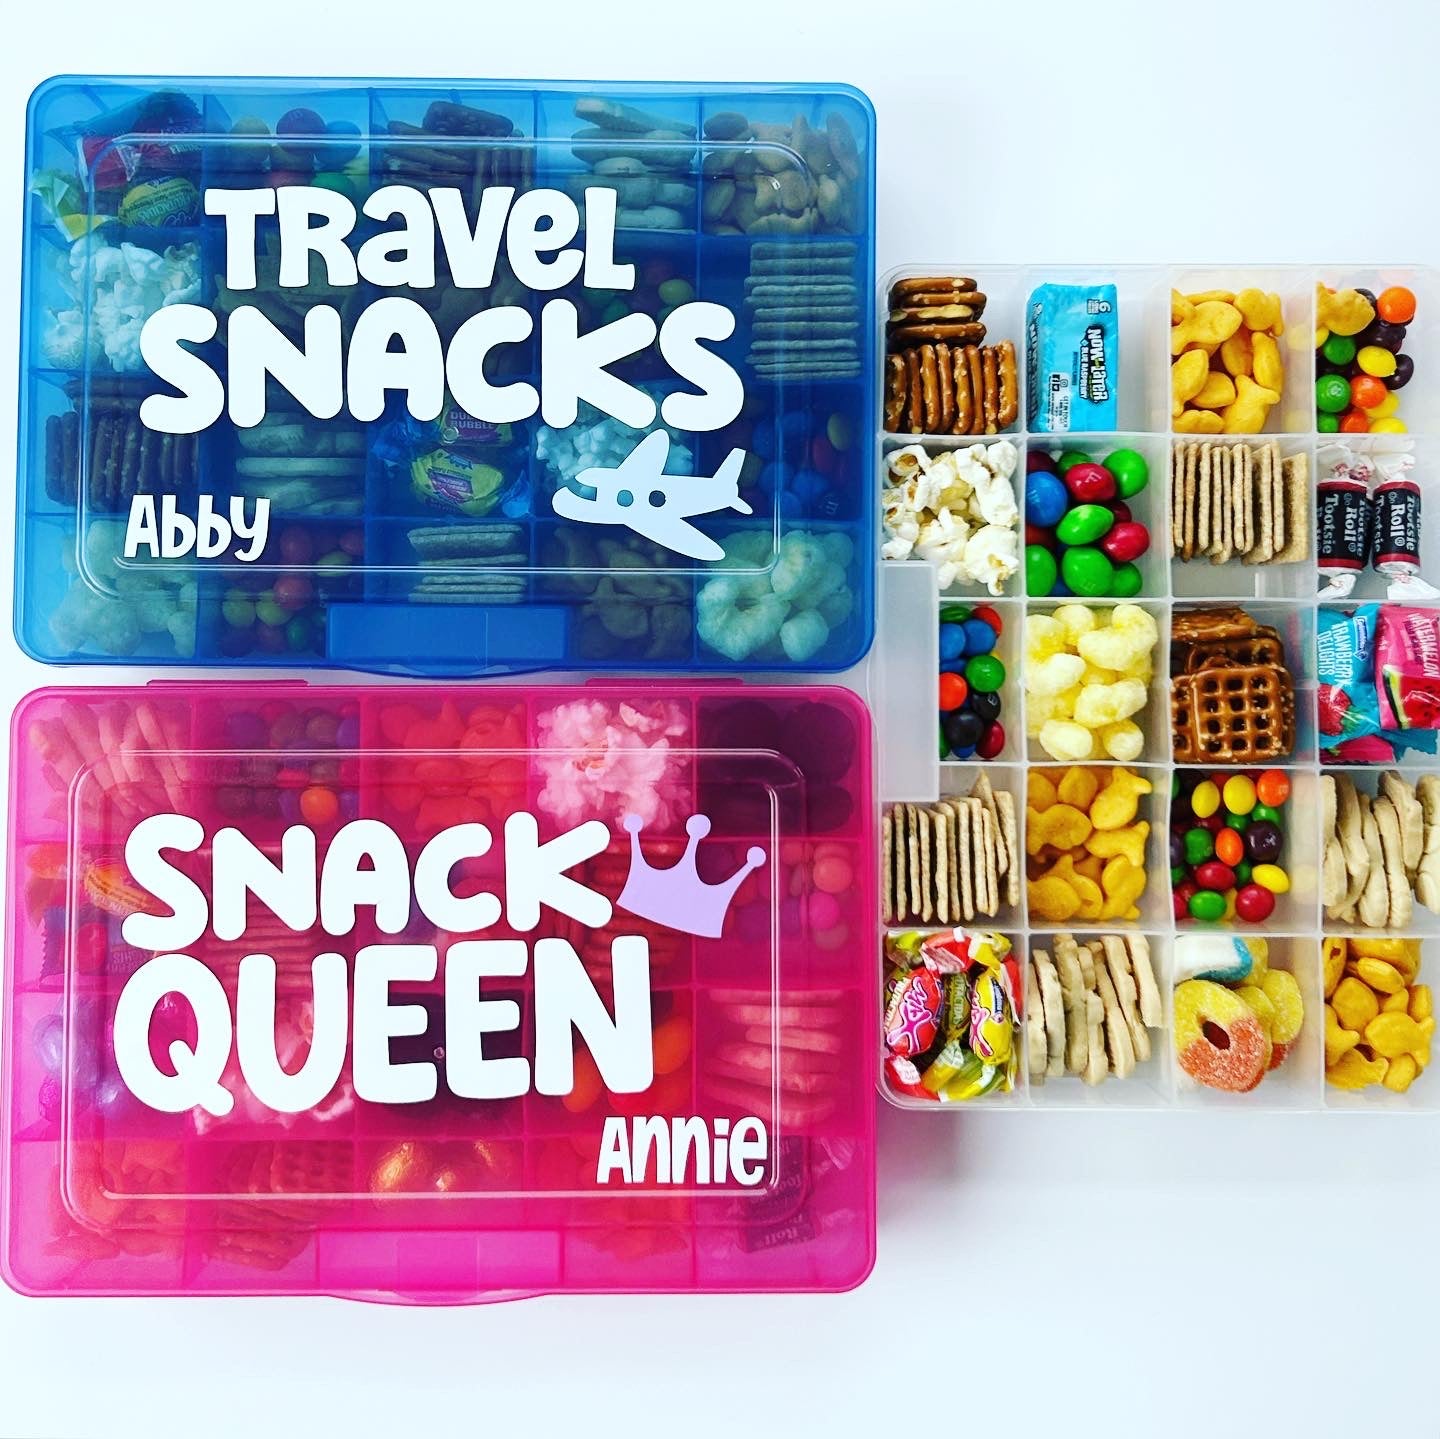 These snack boxes have saved the day more than once! 😍 #travel